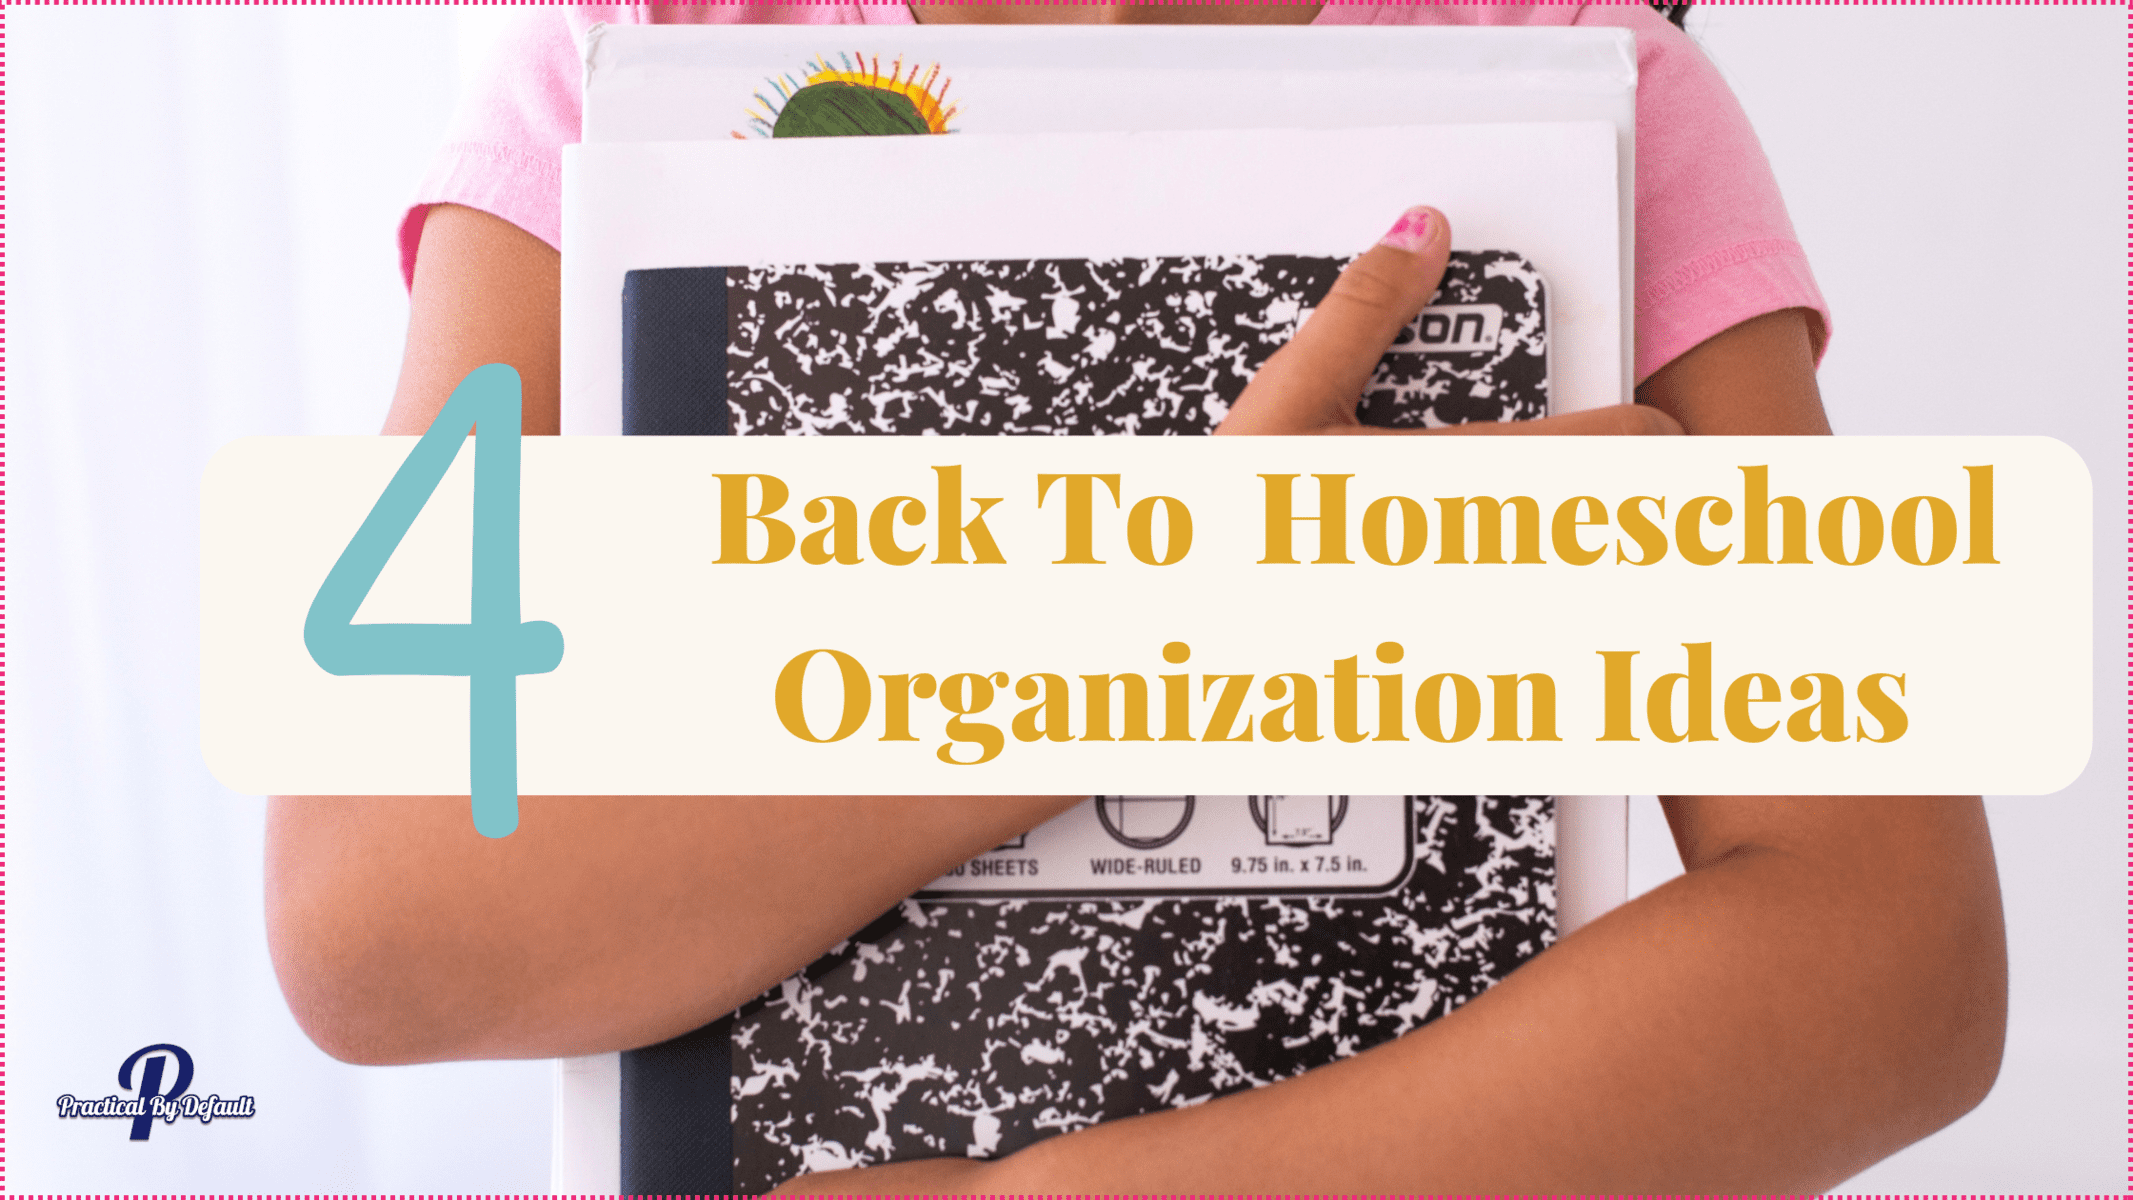 The 4 Best Back To Homeschool Organization Ideas To Help Stressed Moms